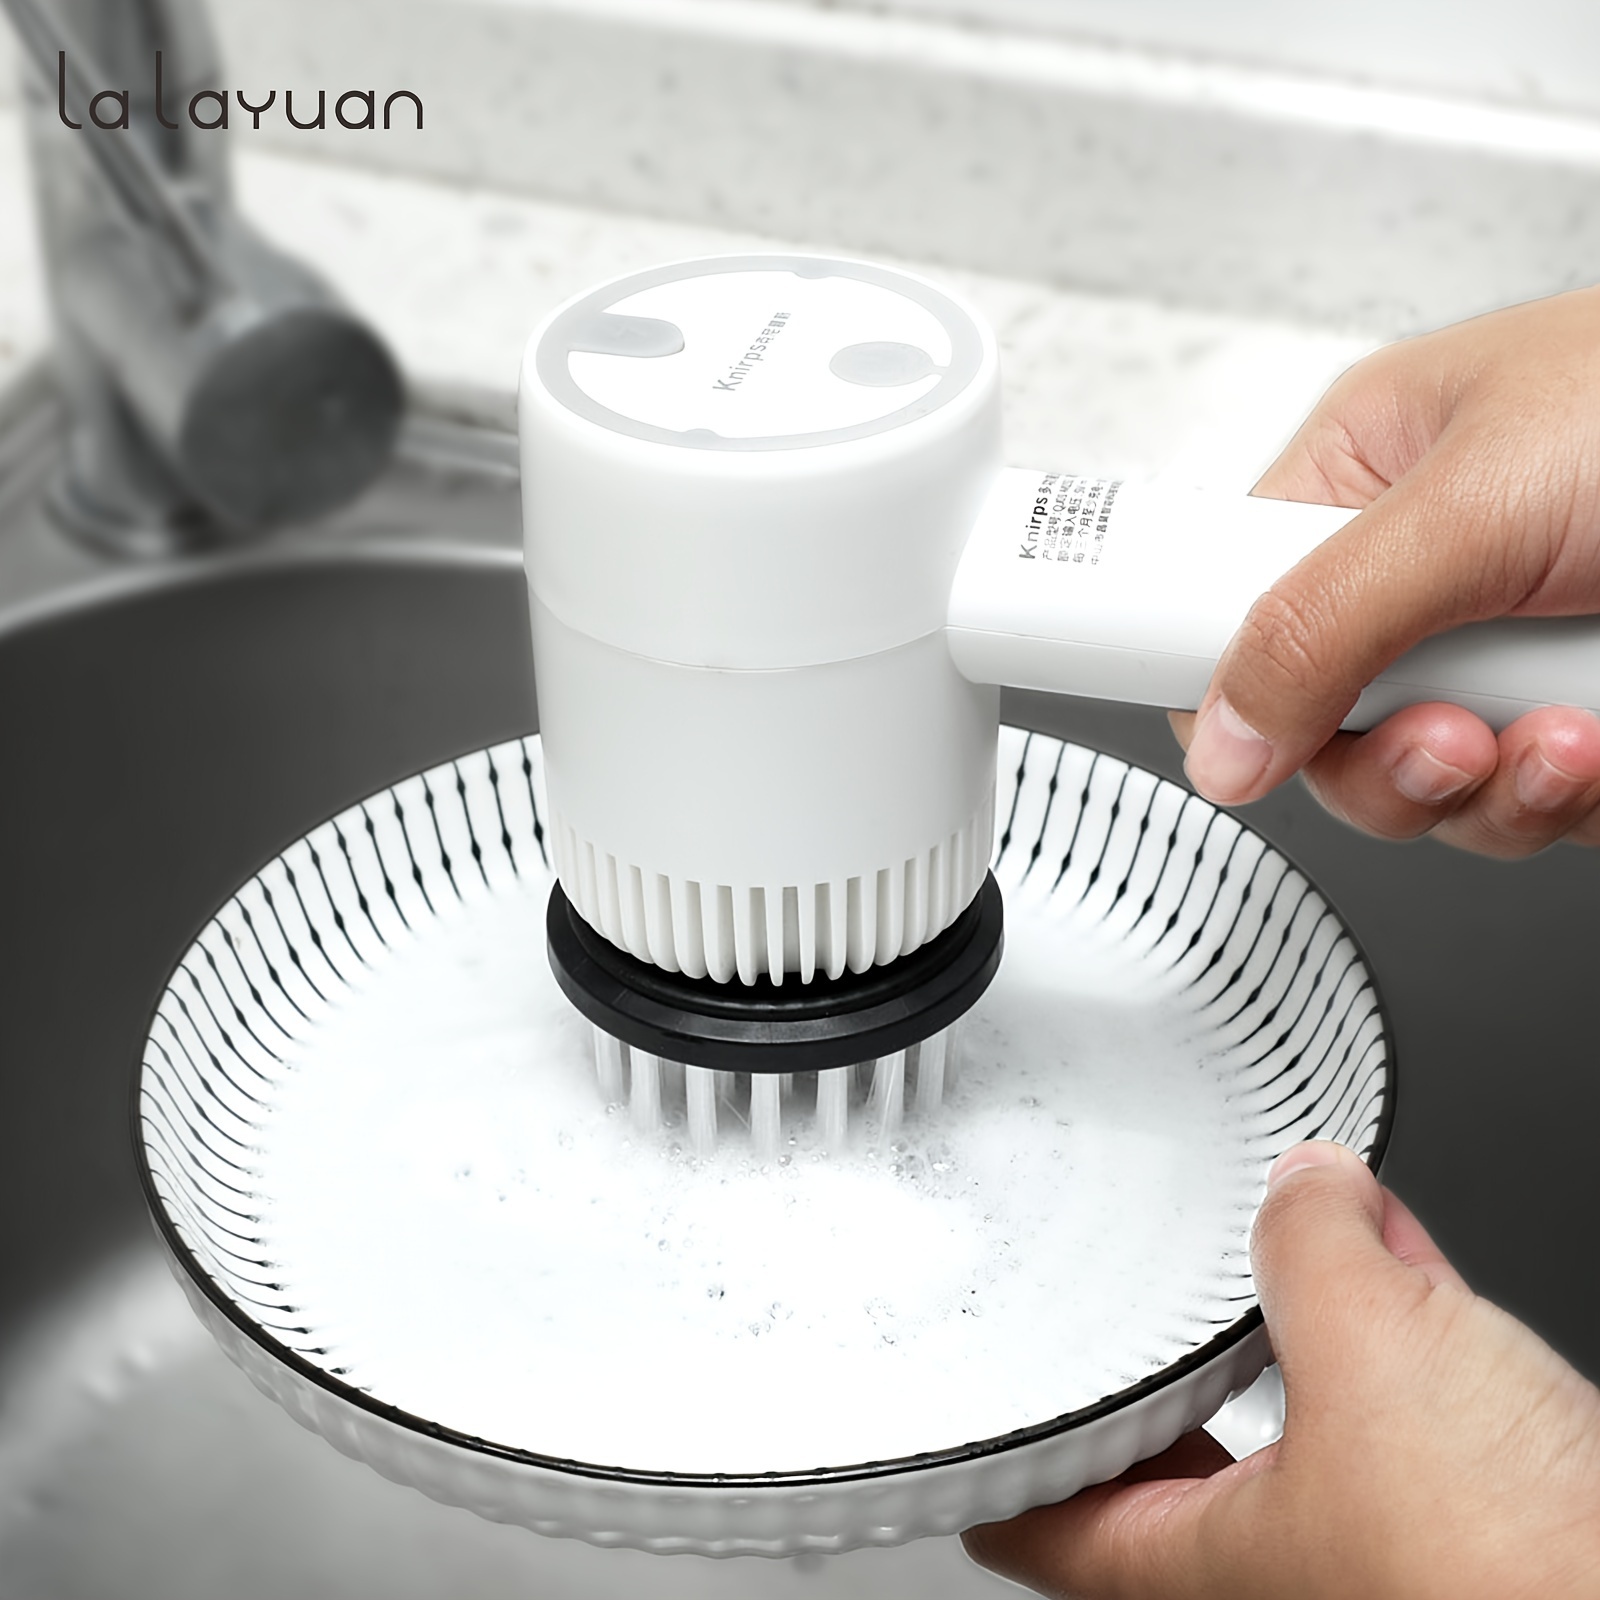 Electric Spin Scrubber, E Spin Power Scrubber Cleaning Brush for Bathroom, Kitchen,Wall, Dish,Oven